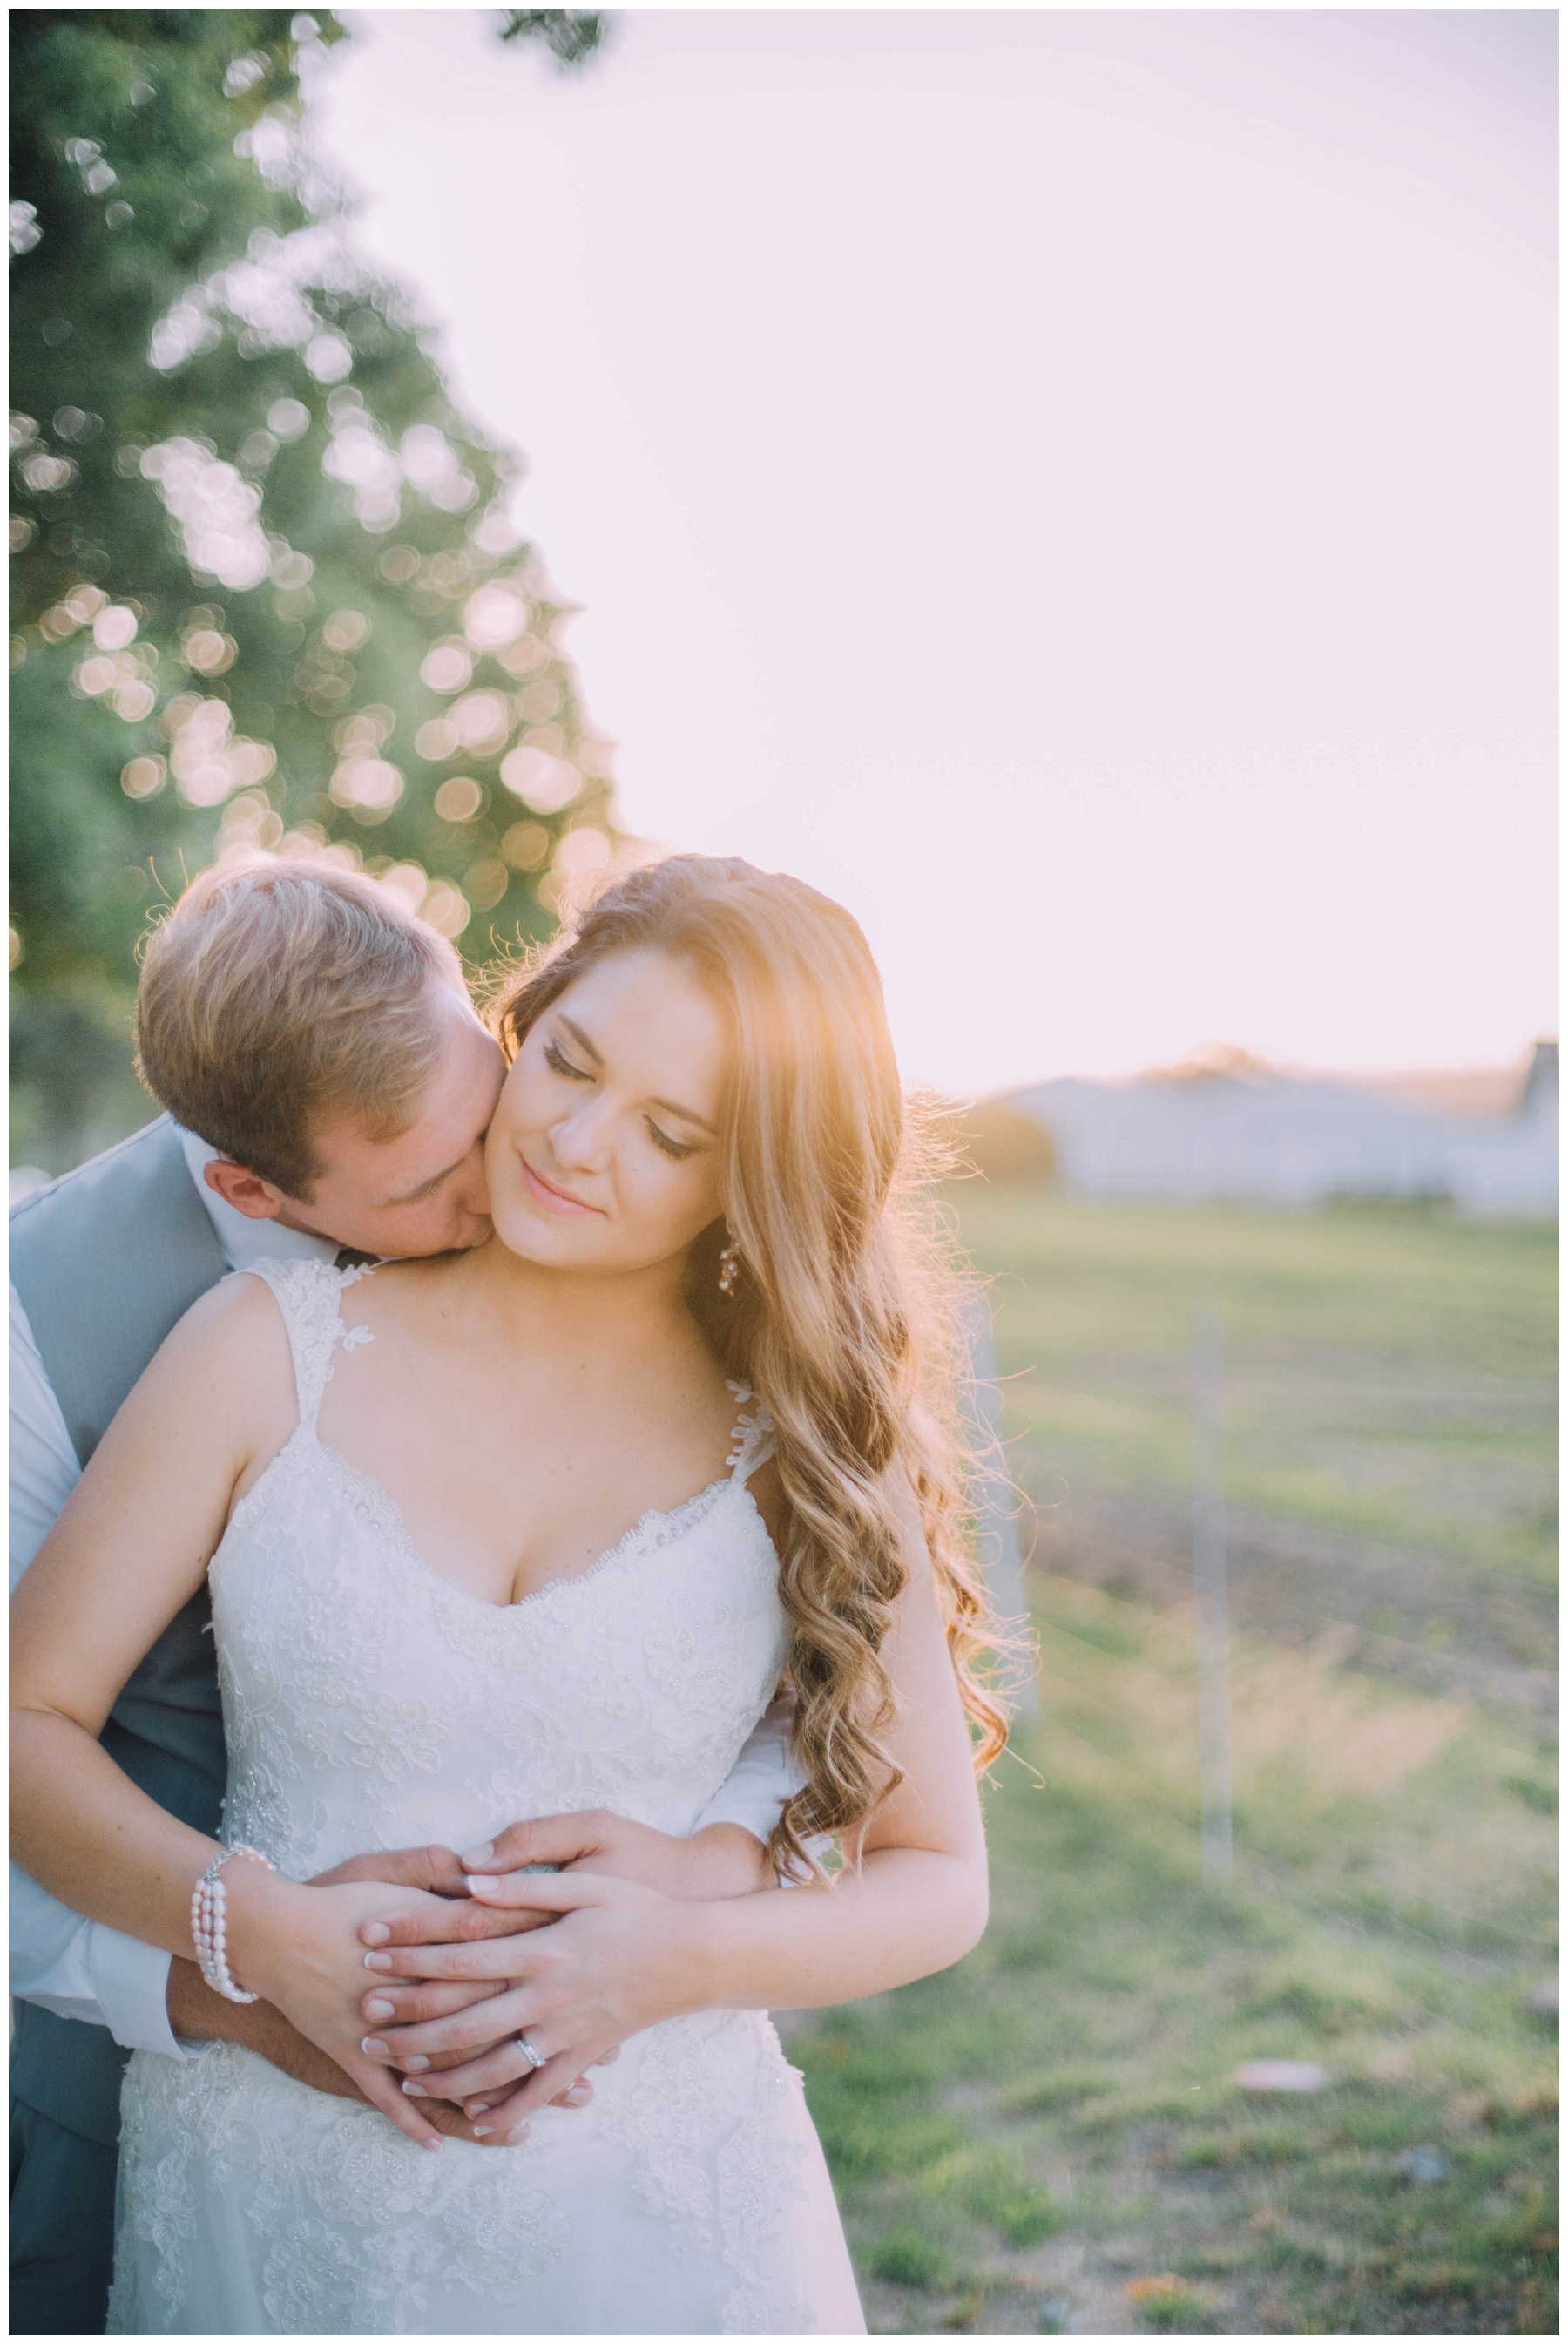 Ronel Kruger Cape Town Wedding and Lifestyle Photographer_8851.jpg